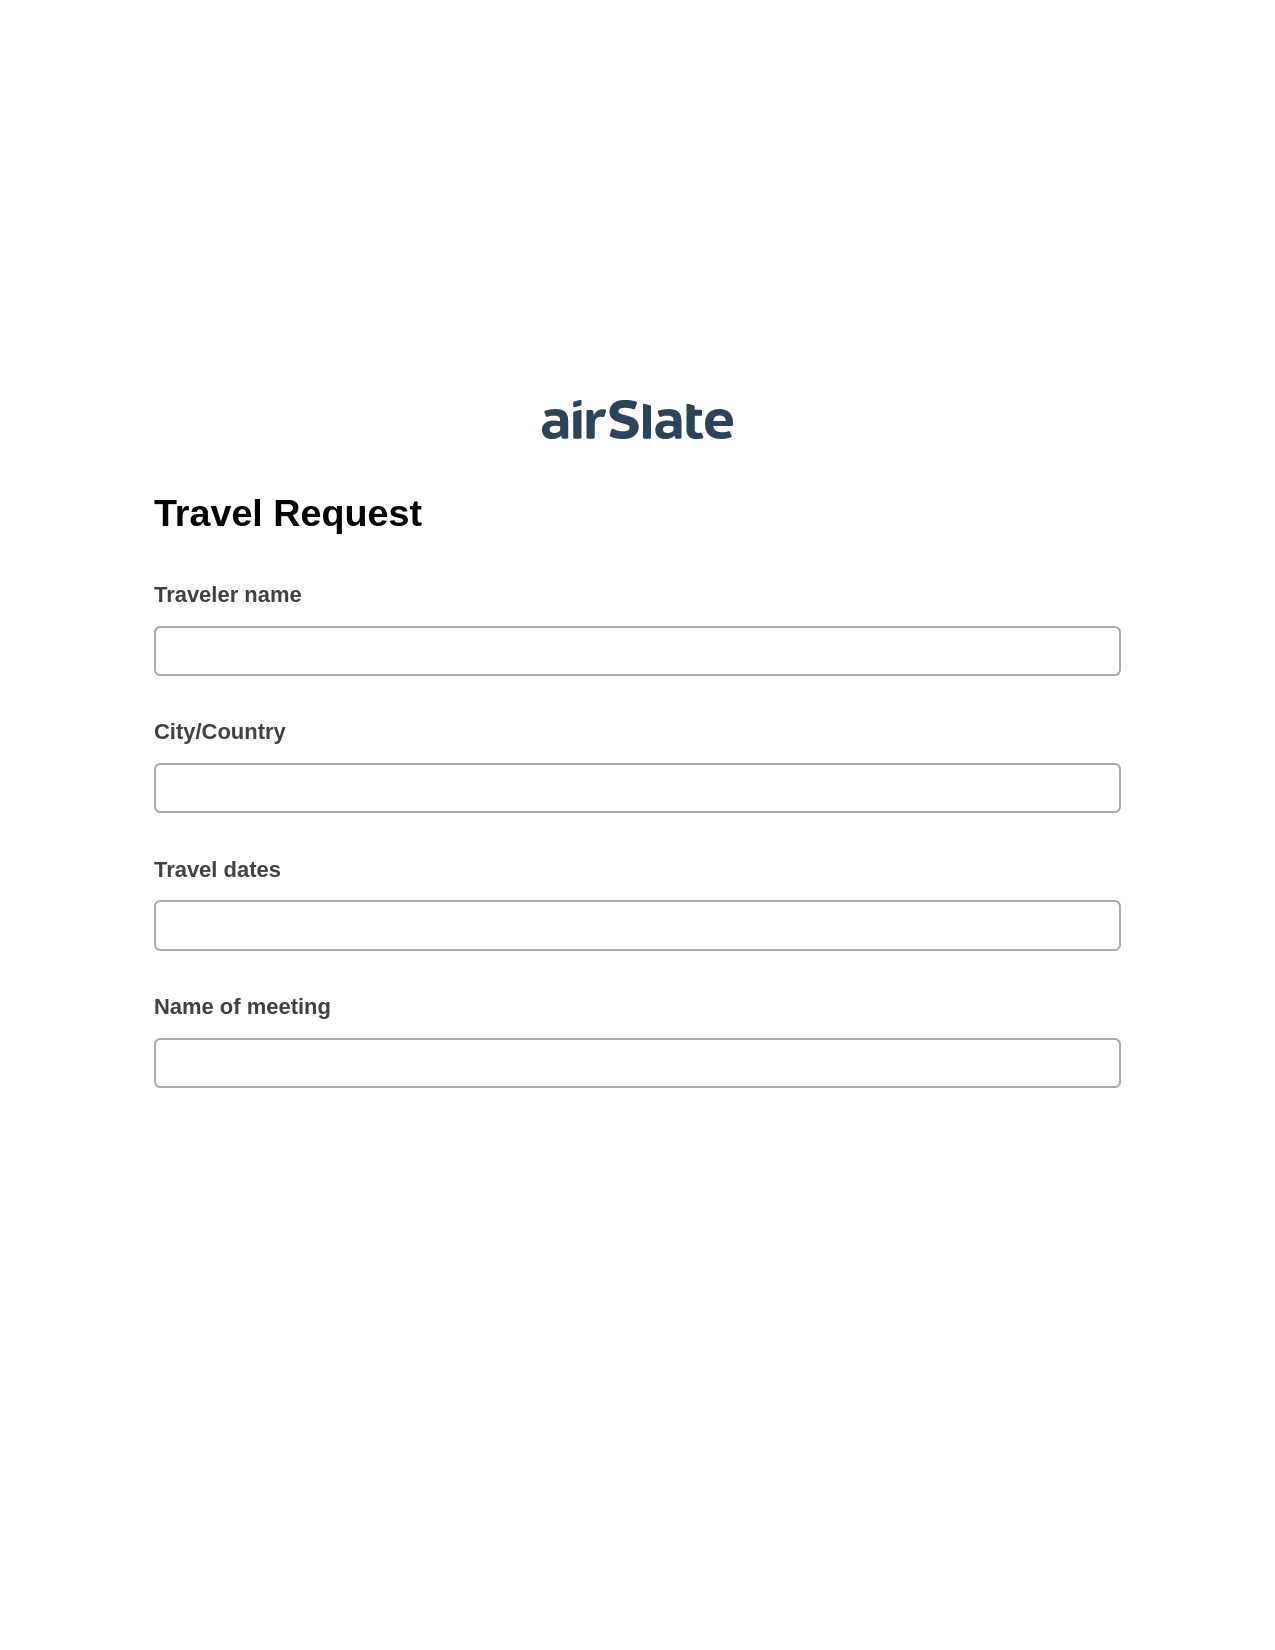 Travel Request Pre-fill from another Slate Bot, Pre-fill with Custom Data Bot, Post-finish Document Bot